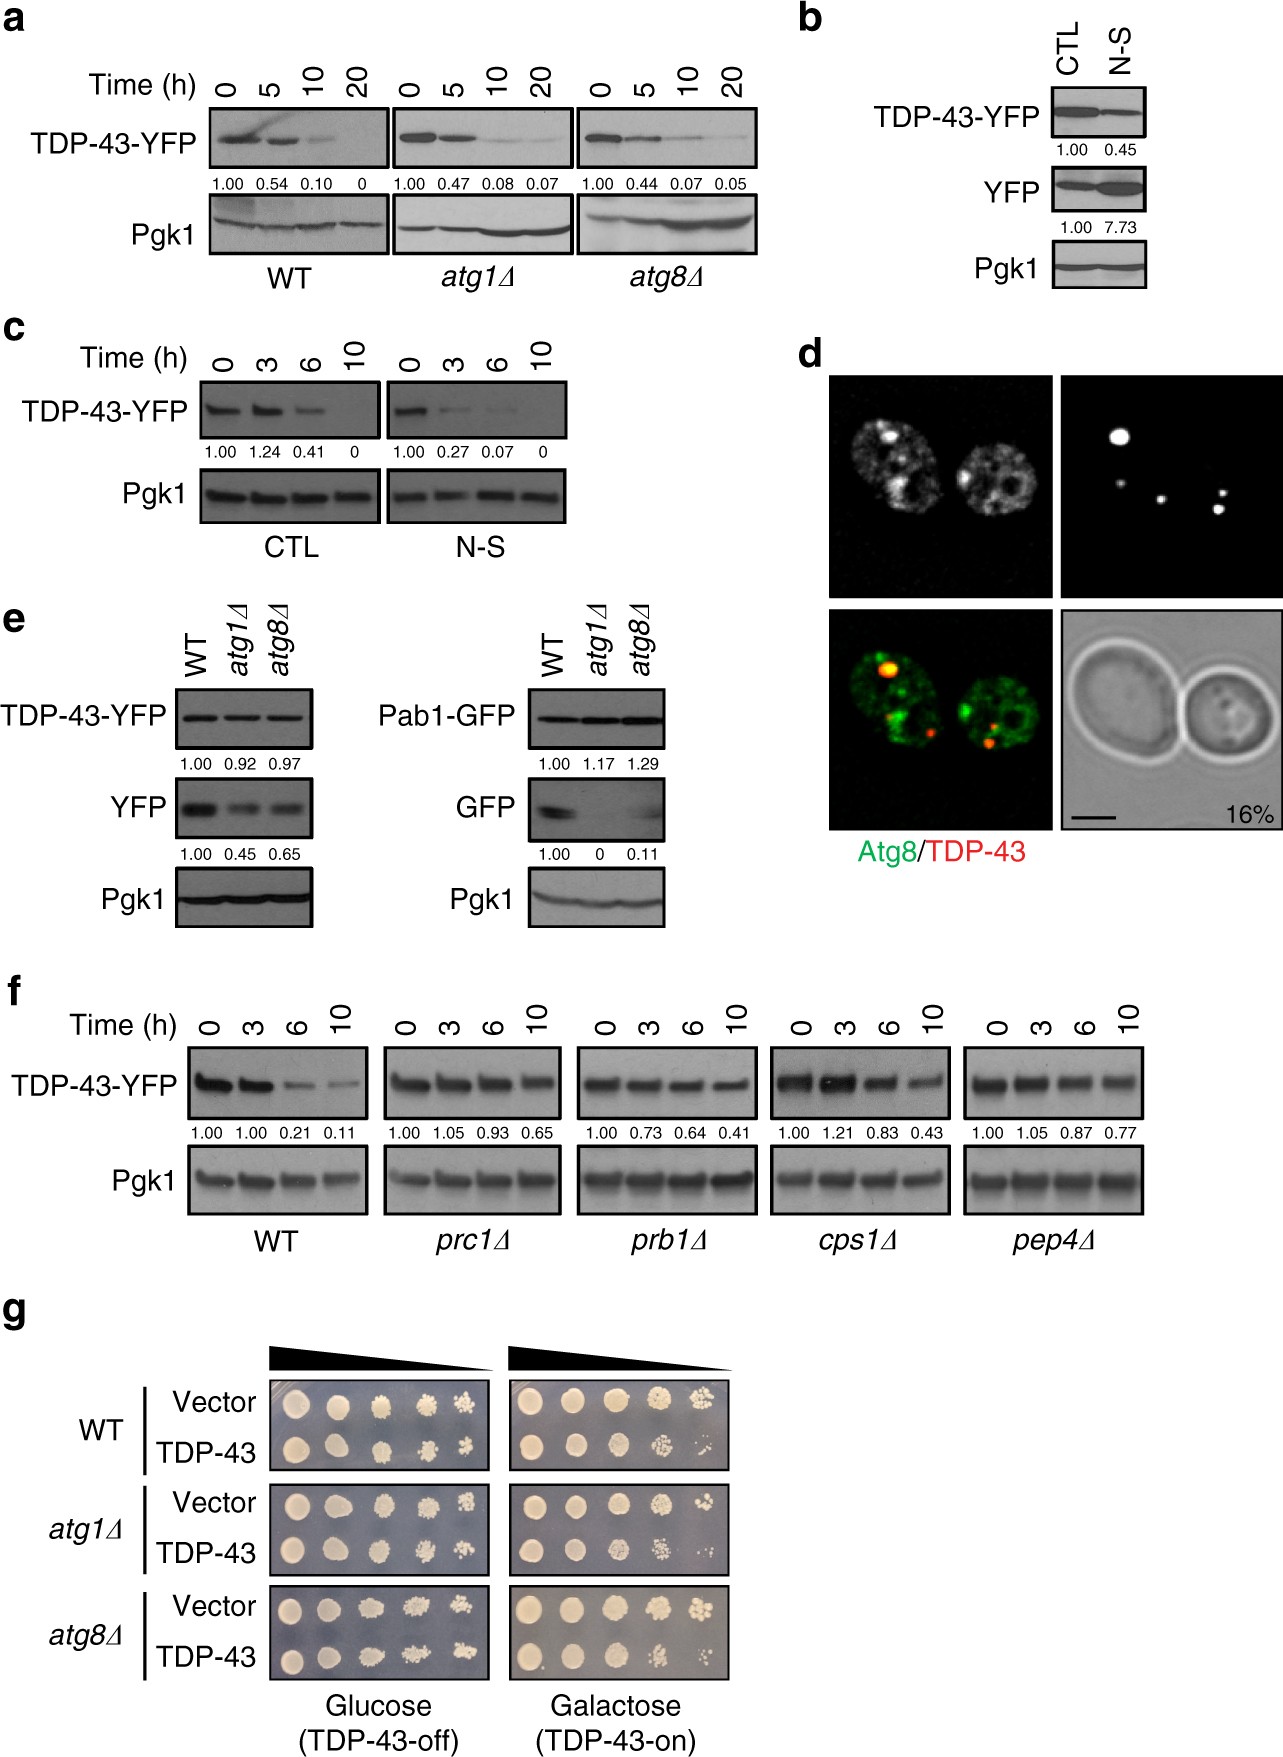 Endocytosis regulates TDP-43 toxicity and turnover | Nature Communications